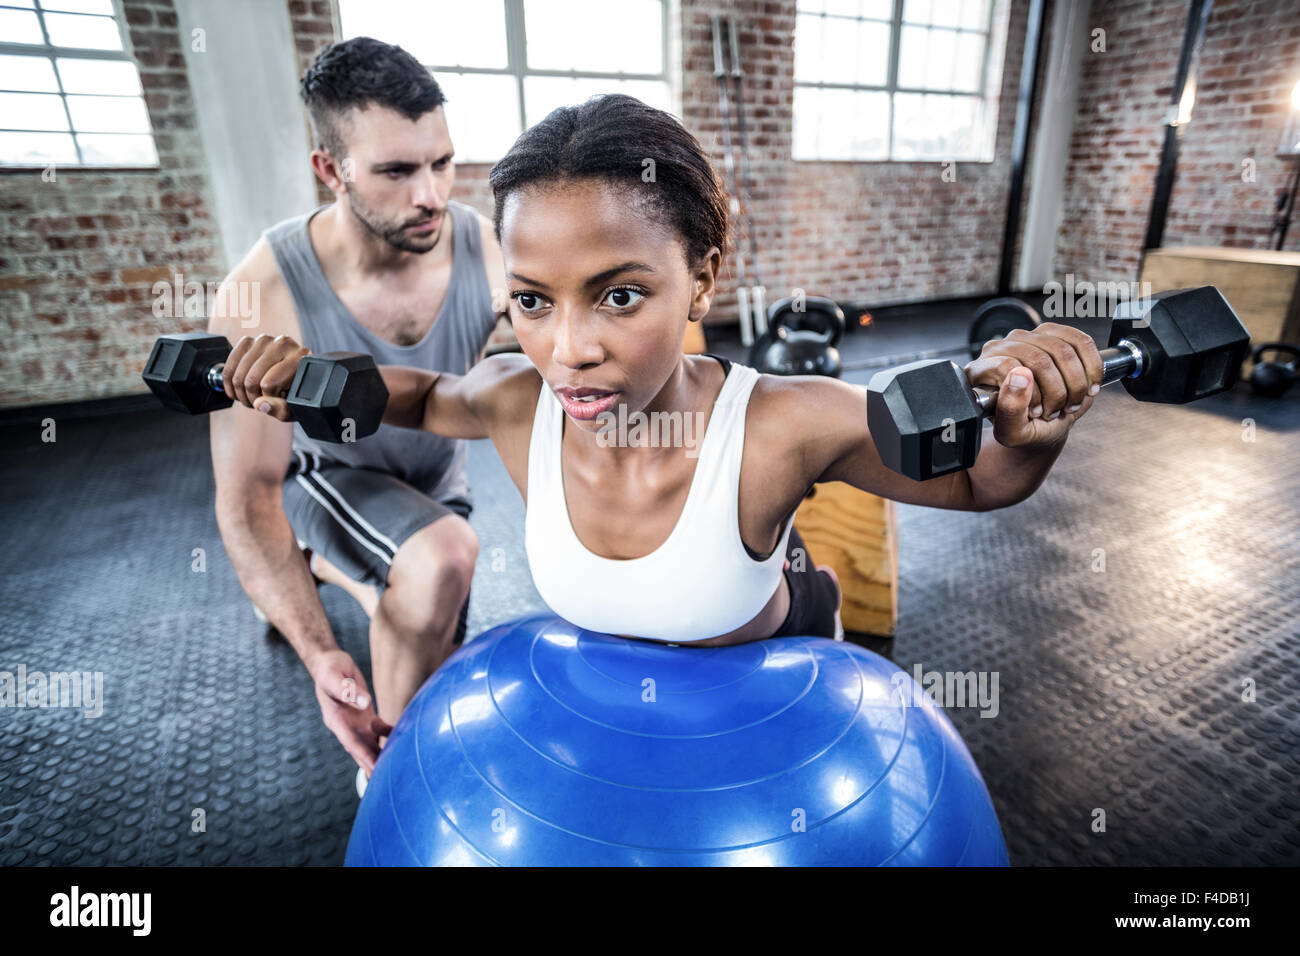 Personal trainer working with client holding dumbbell Stock Photo